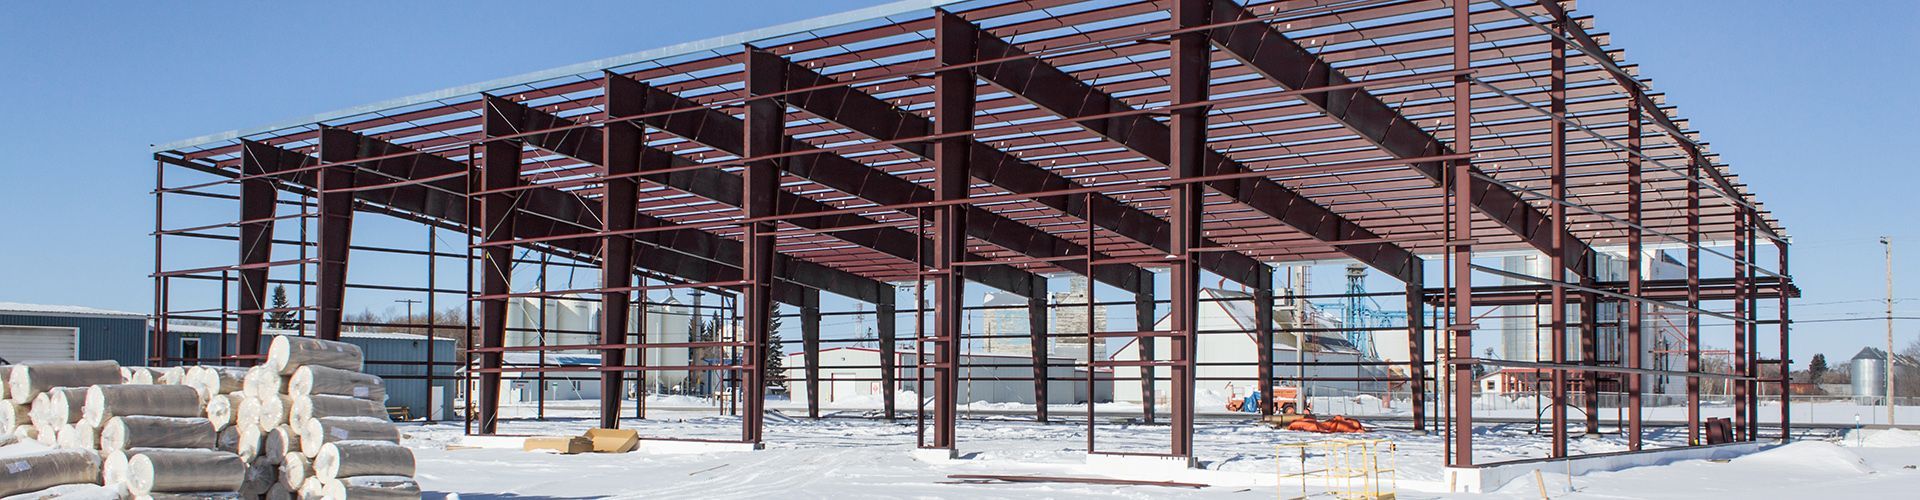 Pre-engineered metal building projects are best completed using lean engineering practices.